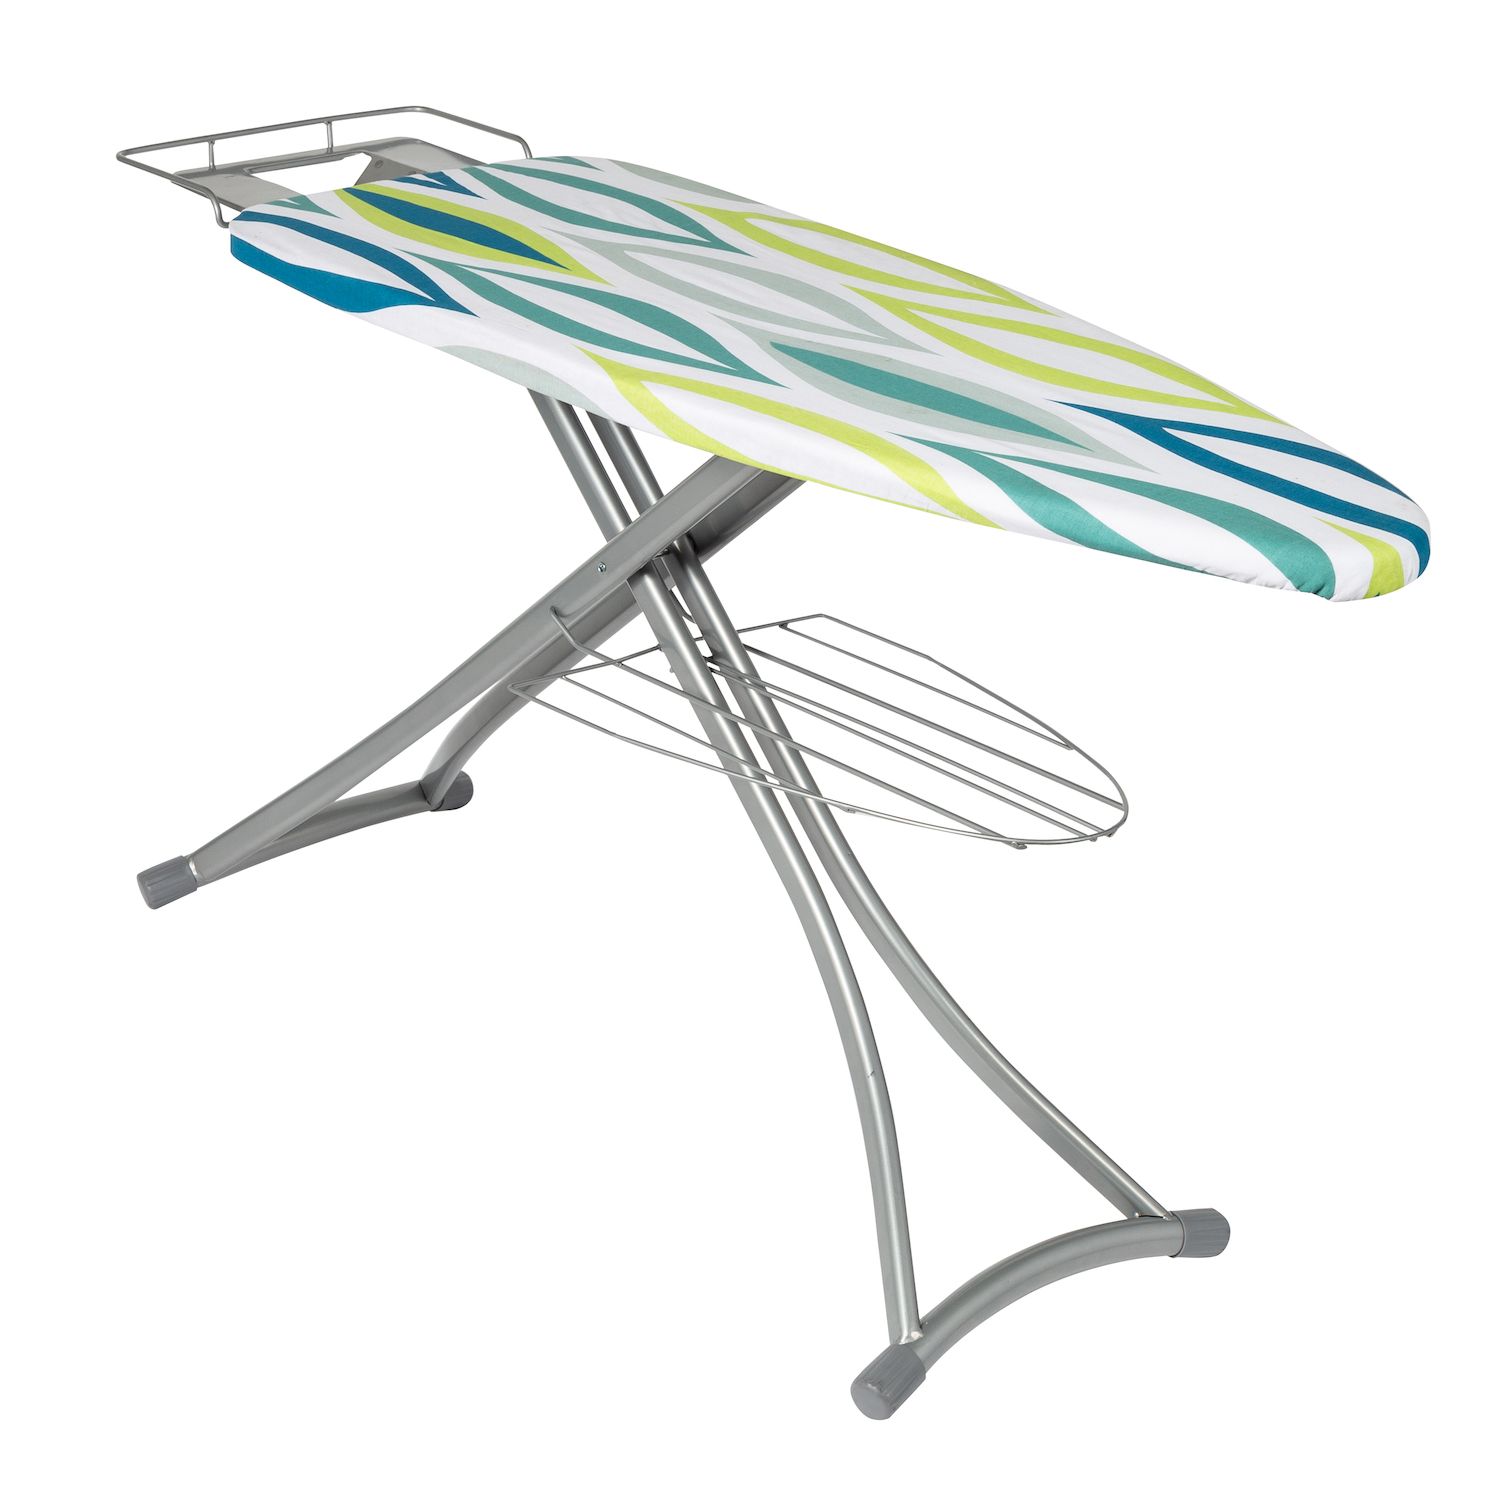 Image for Honey-Can-Do Collapsible Ironing Board with Iron Rest at Kohl's.